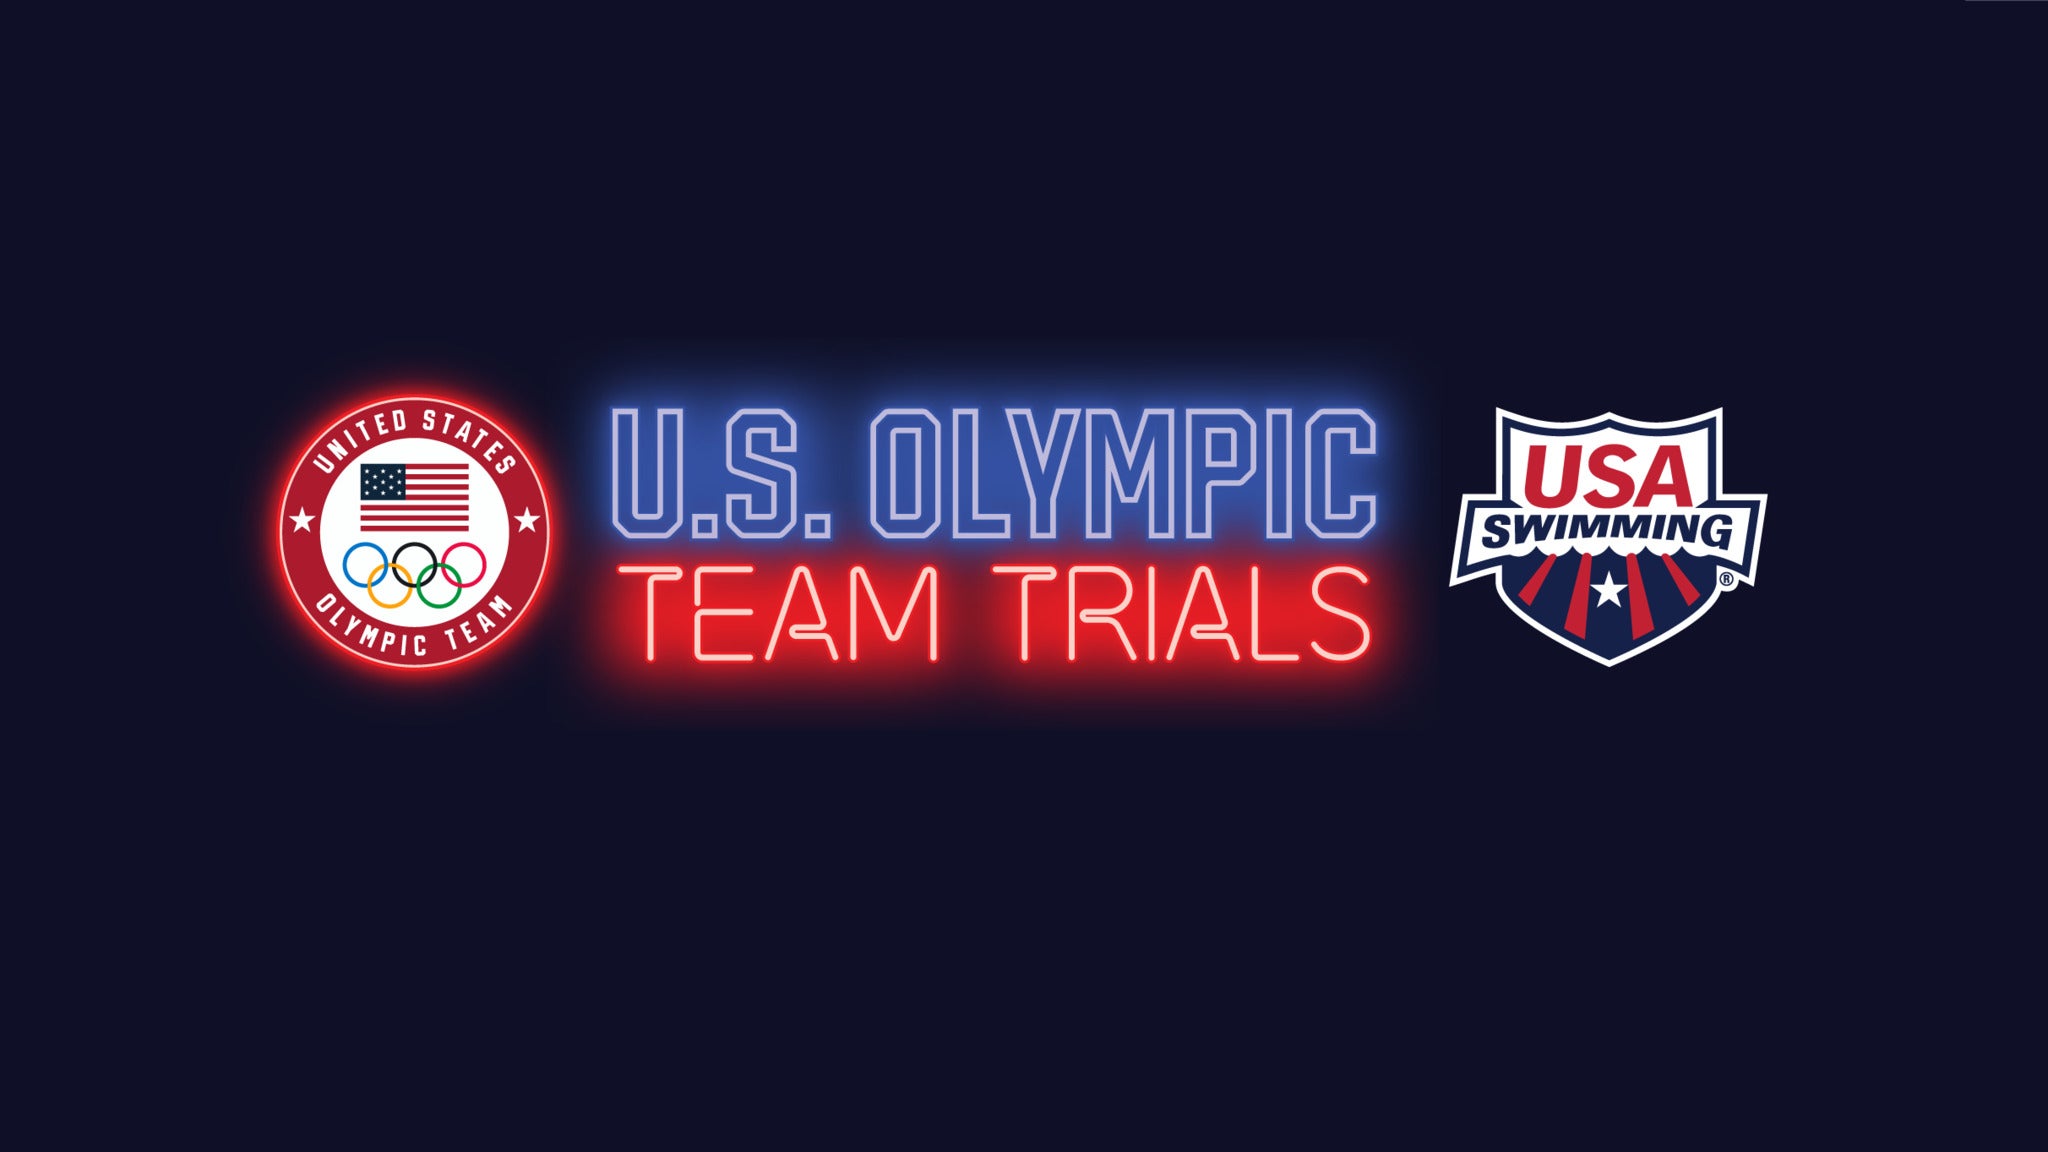 U.S. Olympic Team Trials Swimming Tickets Single Game Tickets